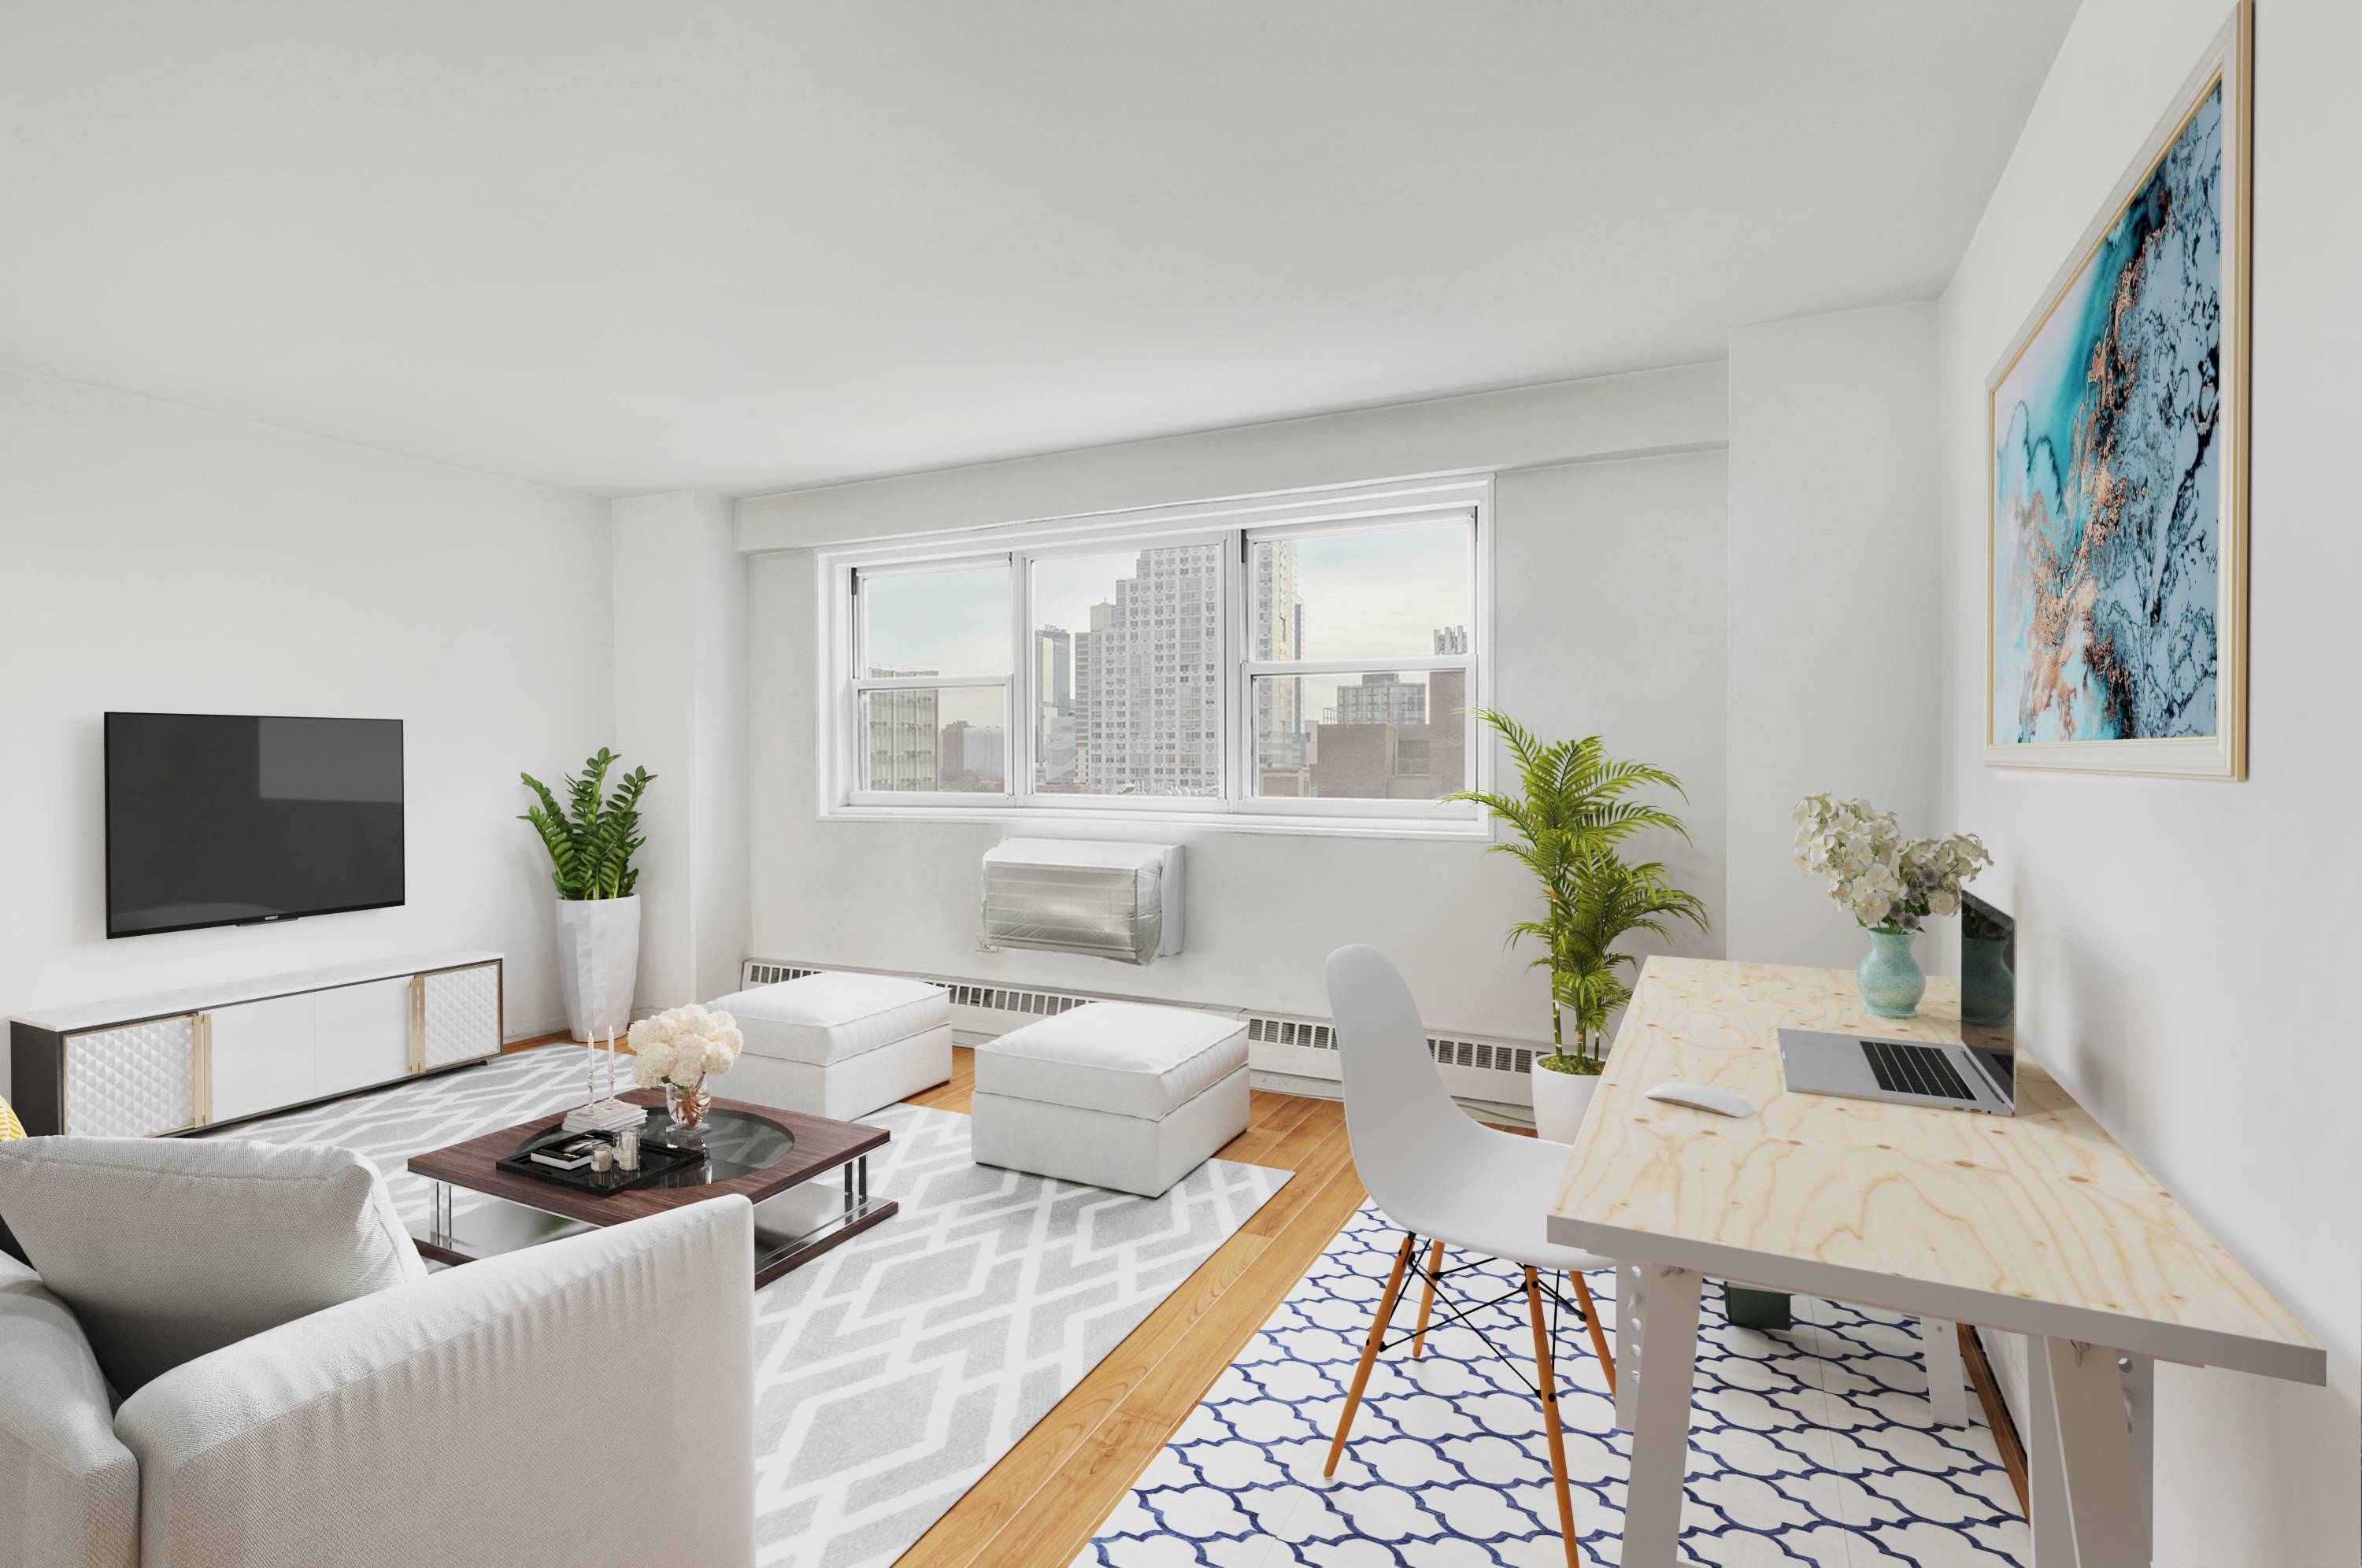 Welcome to 15D at University Towers, a well appointed high floor 1 bedroom located in the heart of Downtown Brooklyn and Fort Greene.